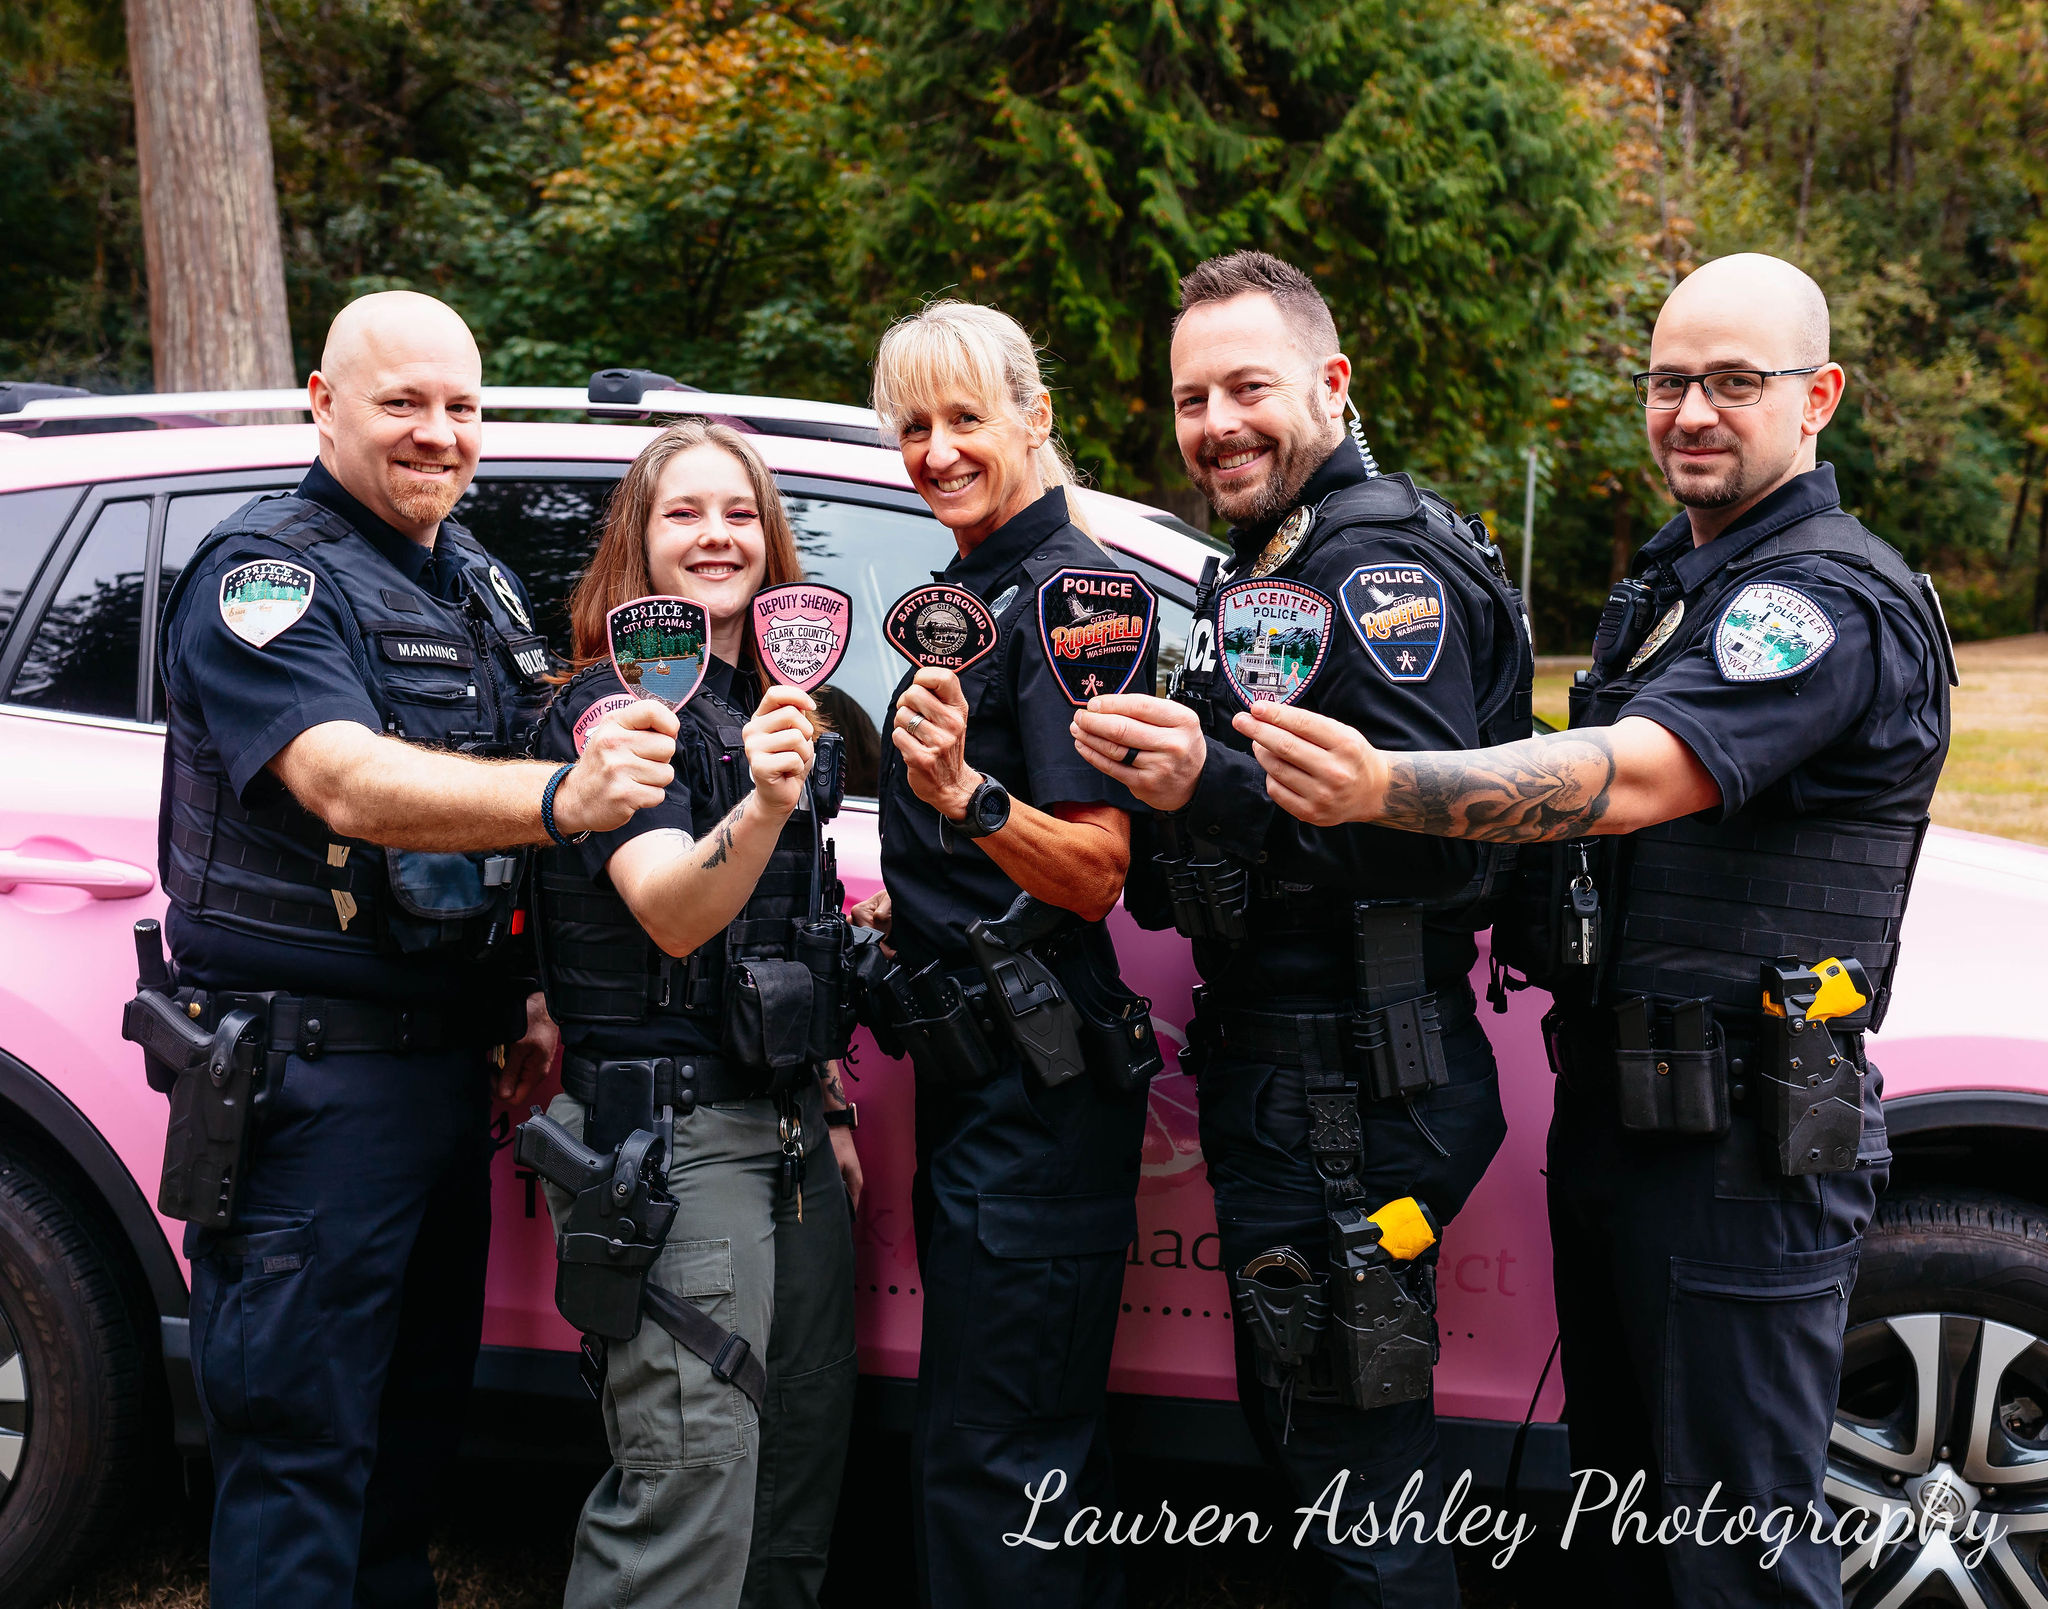 Police pose for photo with pink patches